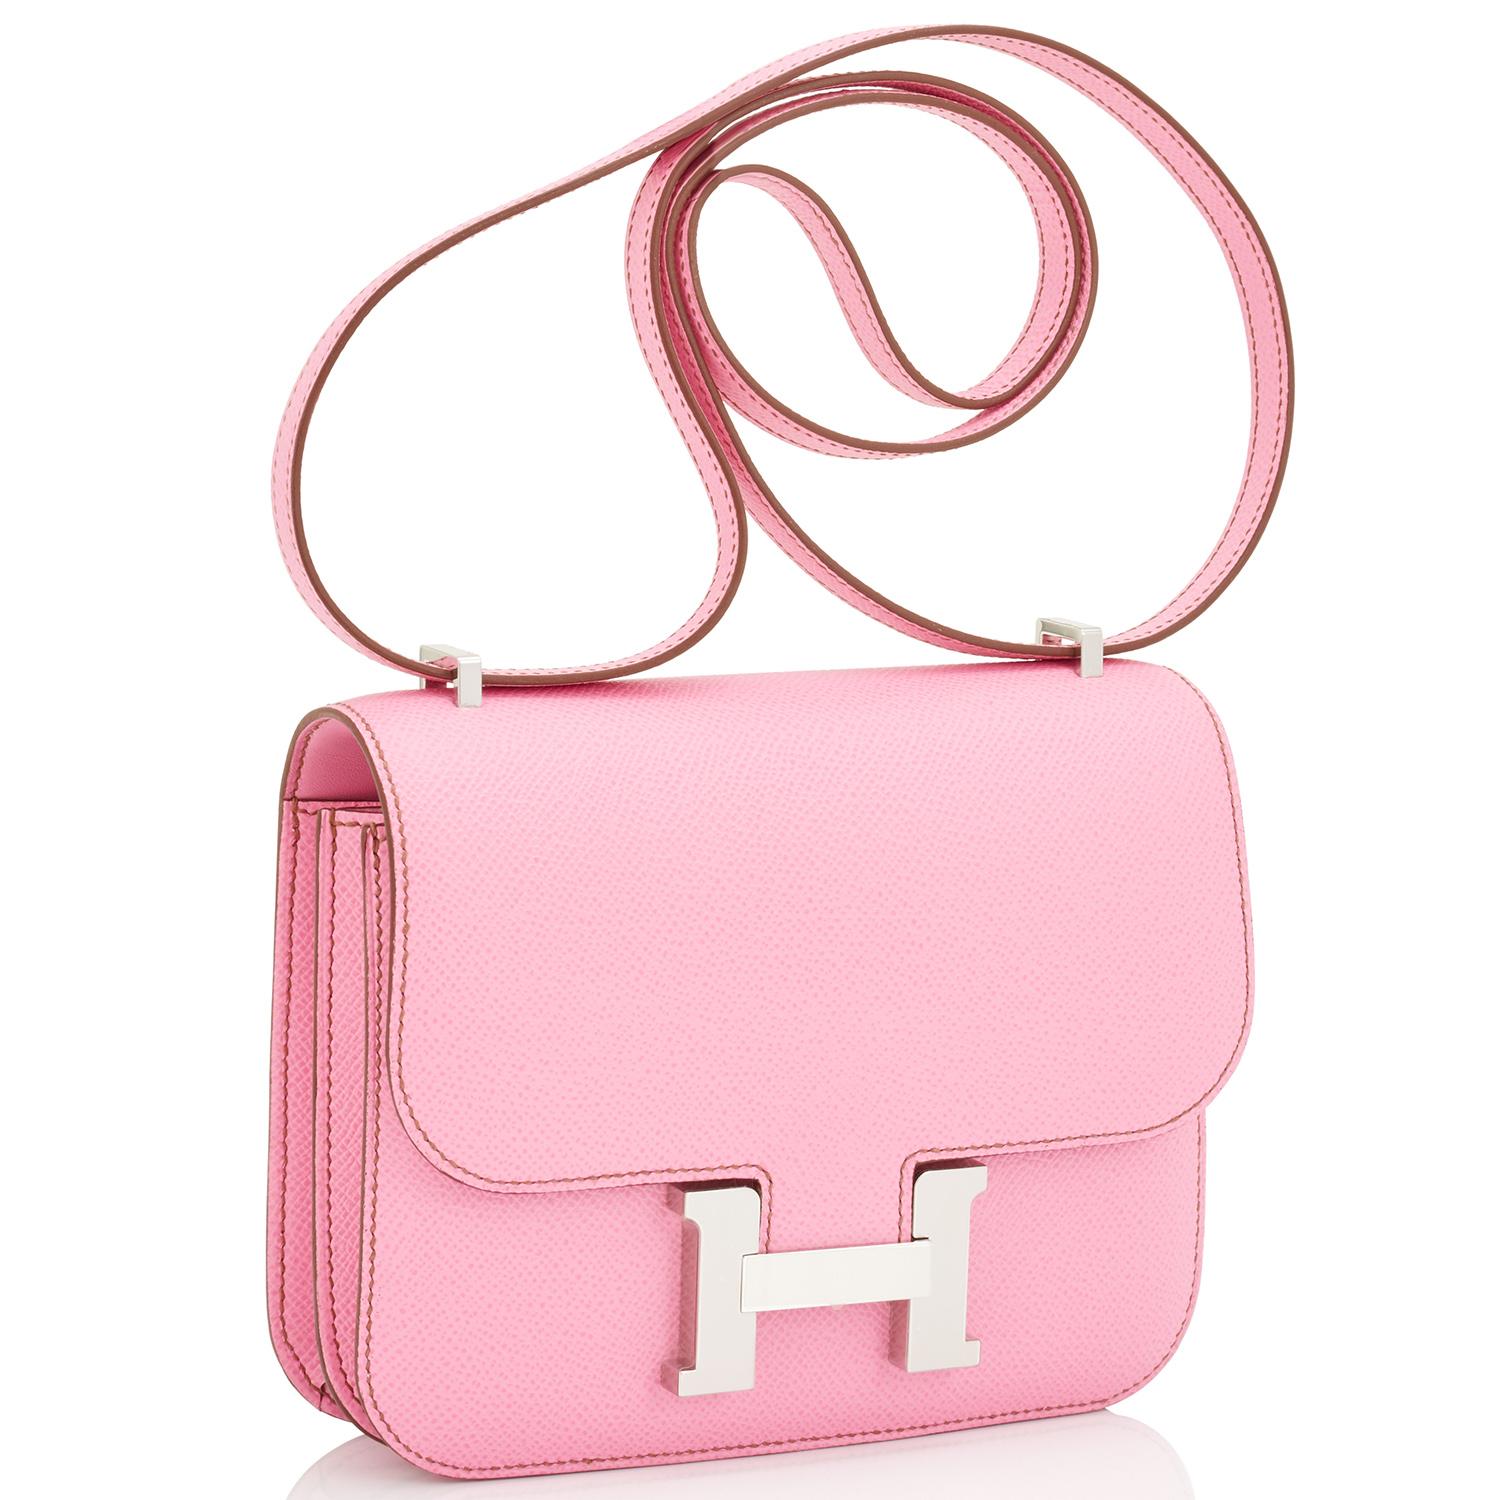 Hermes Bubblegum Pink Mini Constance 18cm Epsom Bag RARE Z Stamp, 2021
Just purchased from Hermes store; bag bears new 2021 interior Z stamp.
Perfect Gift! Brand New in Box. Store Fresh in Pristine Condition (with plastic on hardware).
This is a